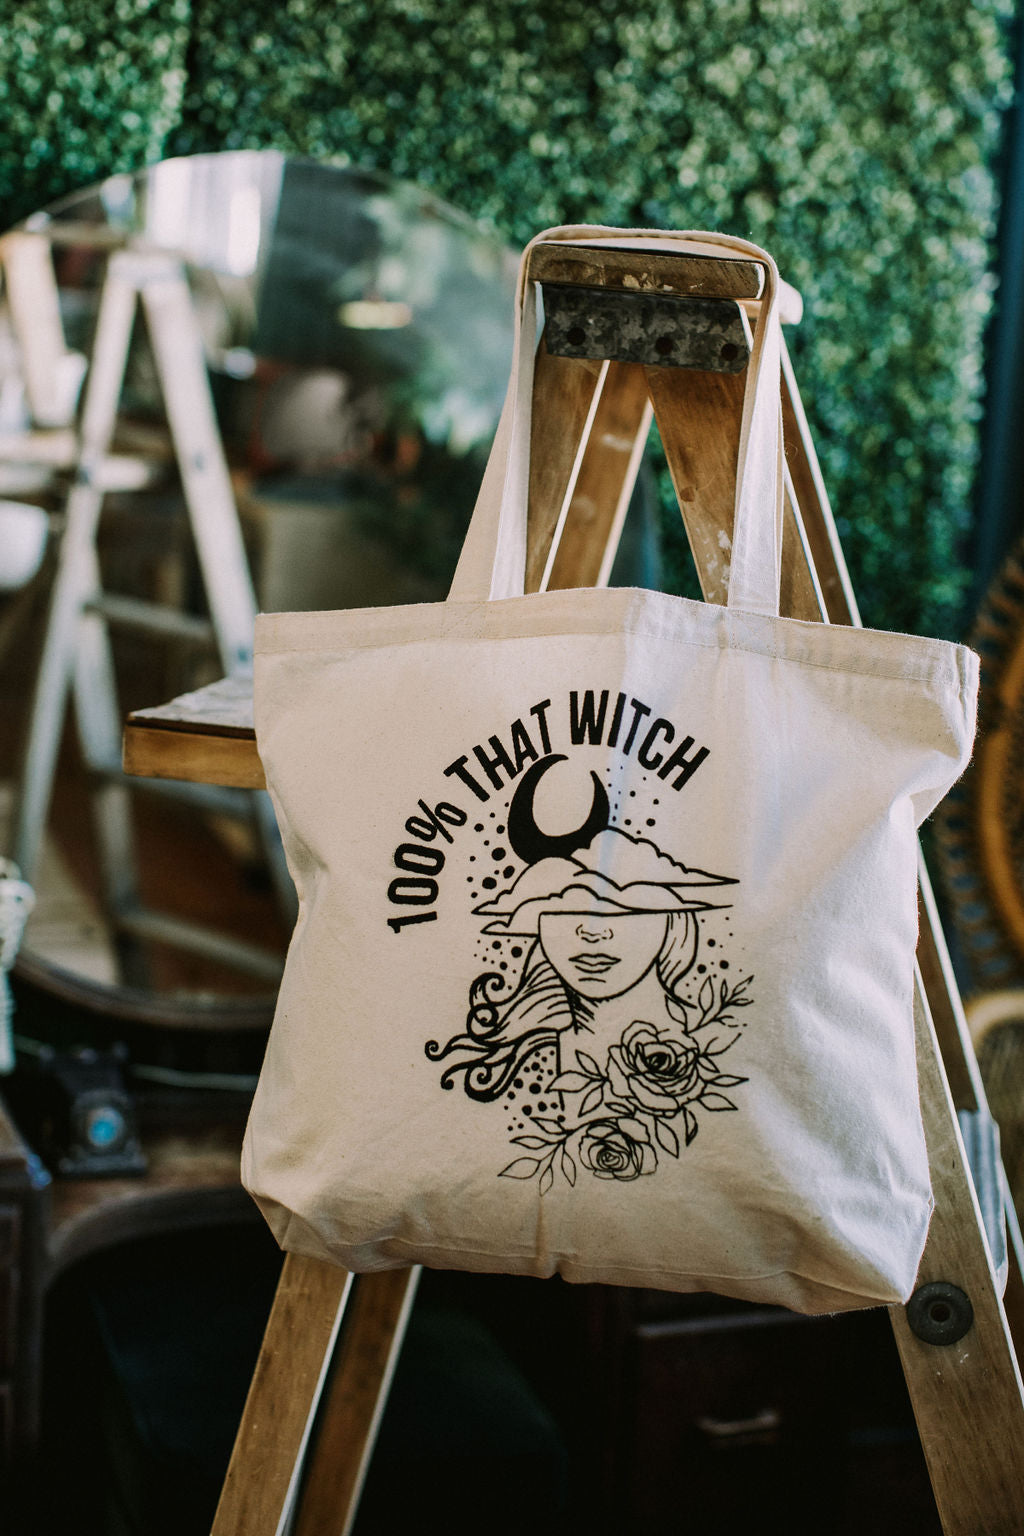 100% That Witch Tote Bag